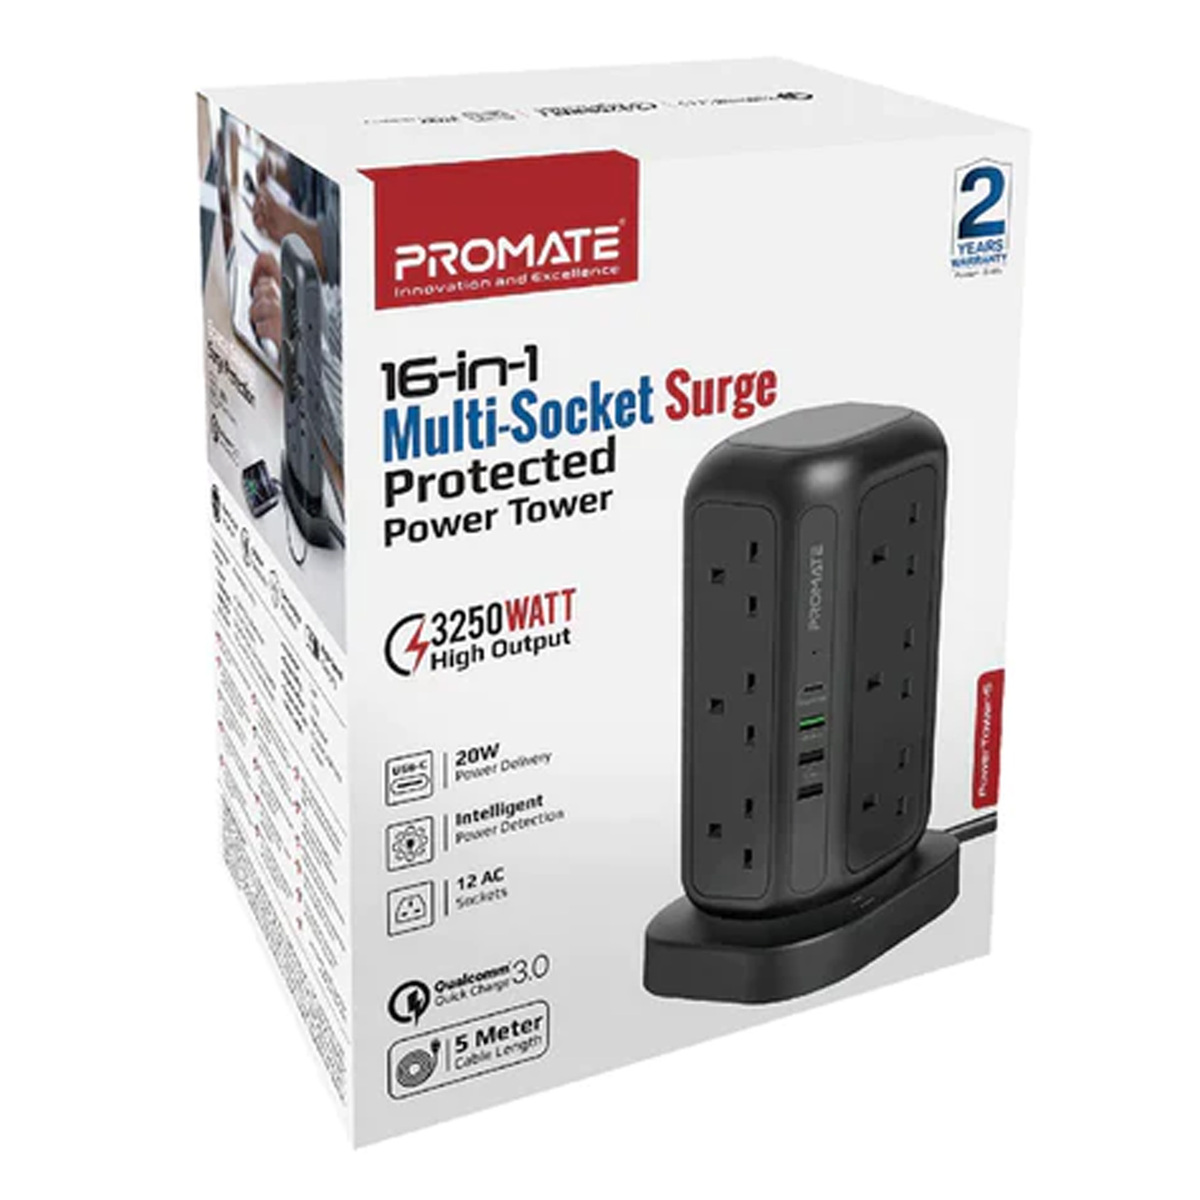 Promate Multi-Socket Surge Protected Power Tower 5